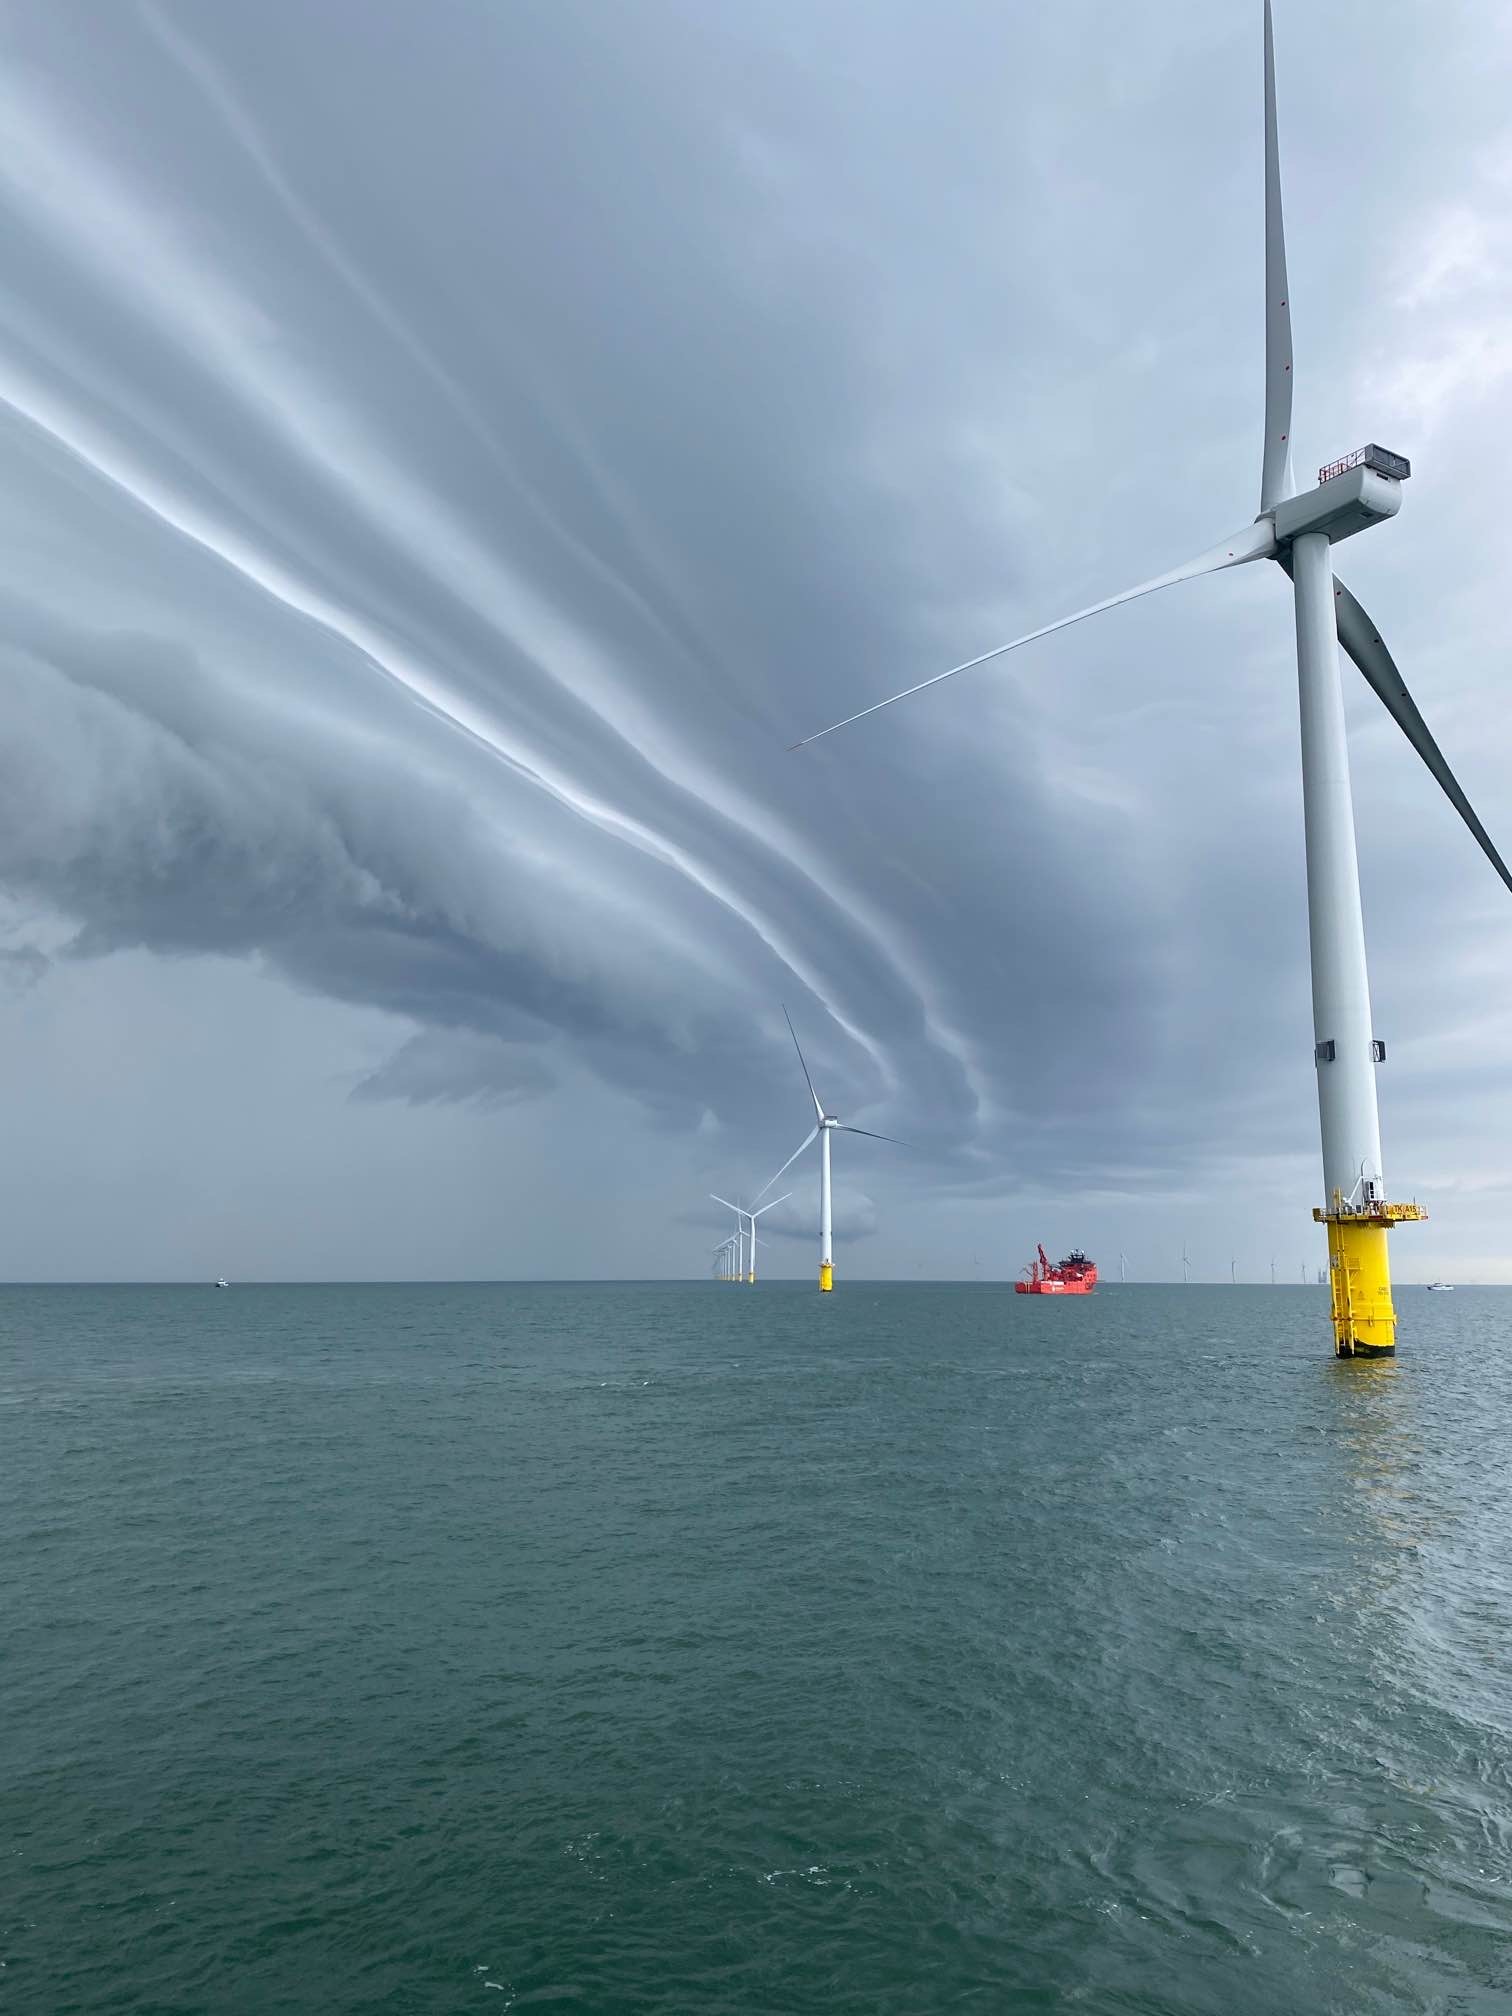 A photo of the offshore wind turbines at Triton Knoll site